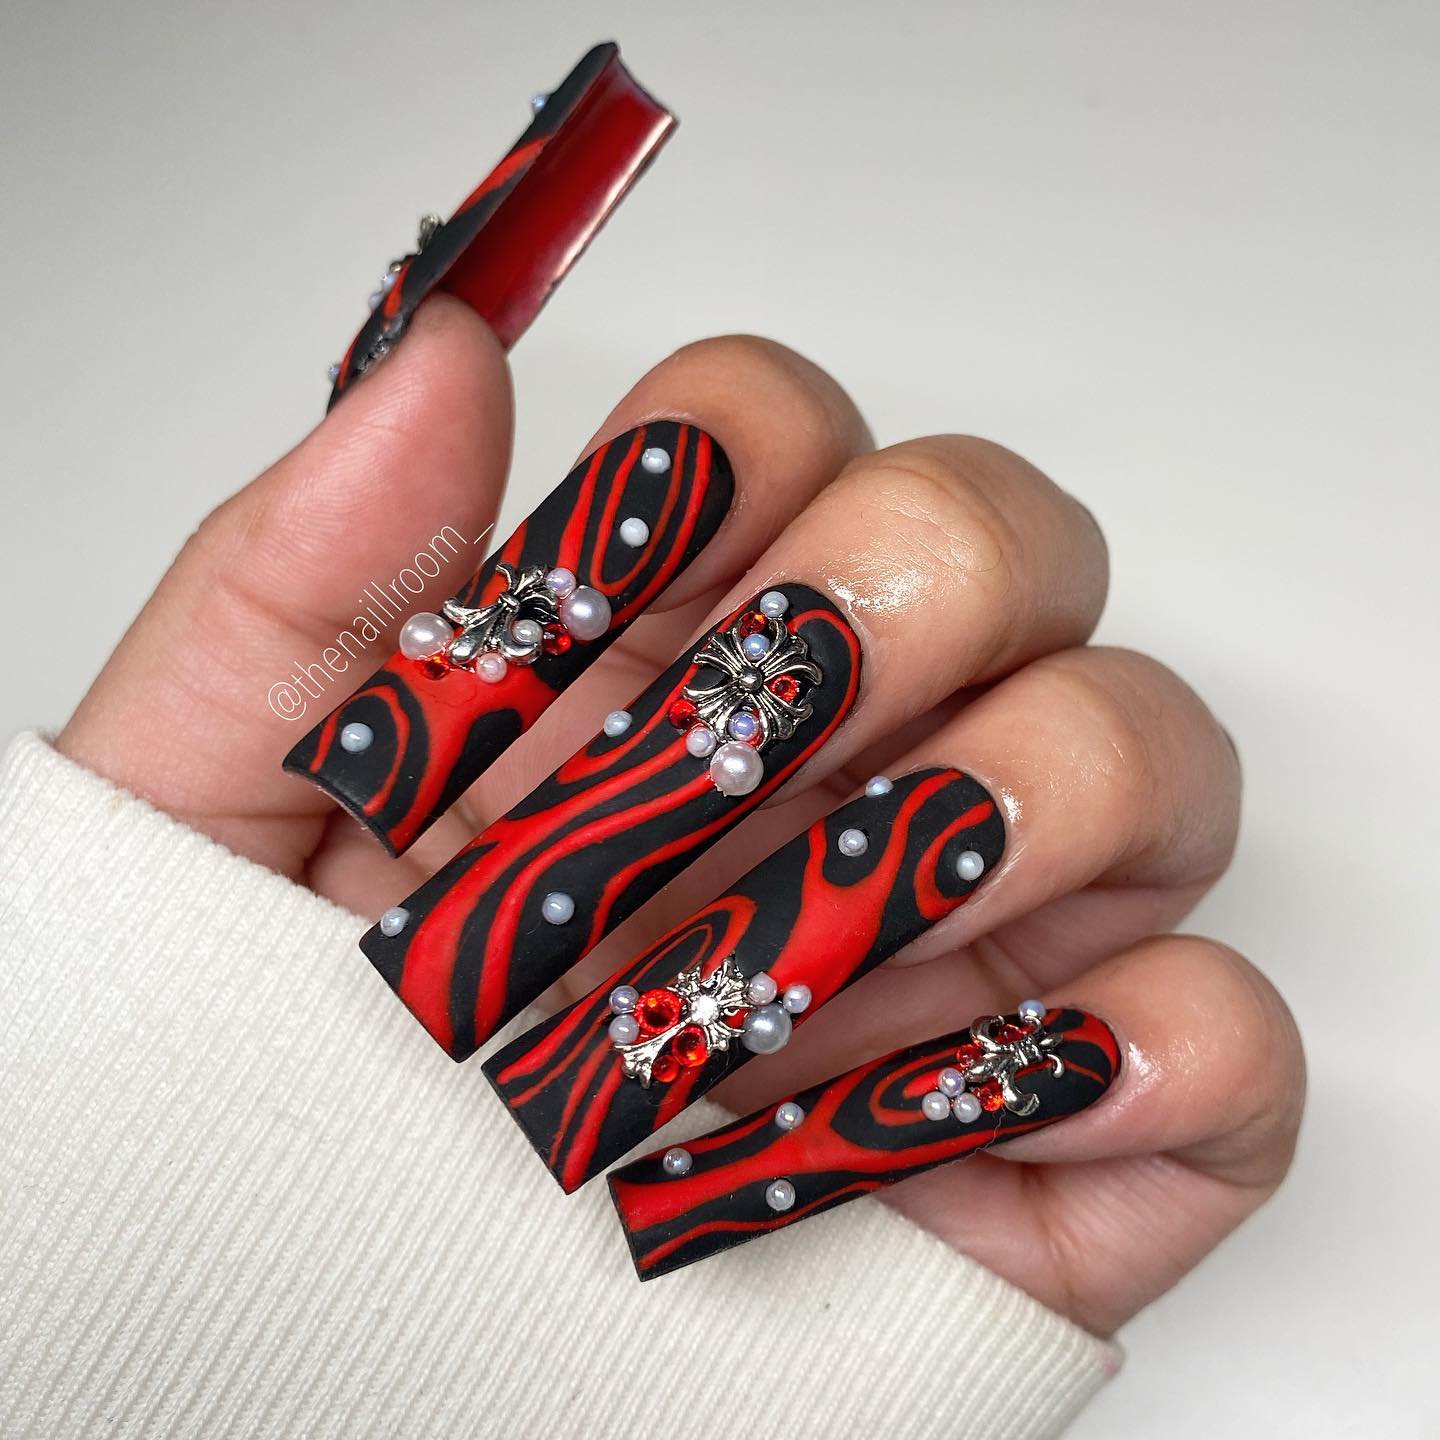 Long Square Matte Black and Red Nails with Pearls